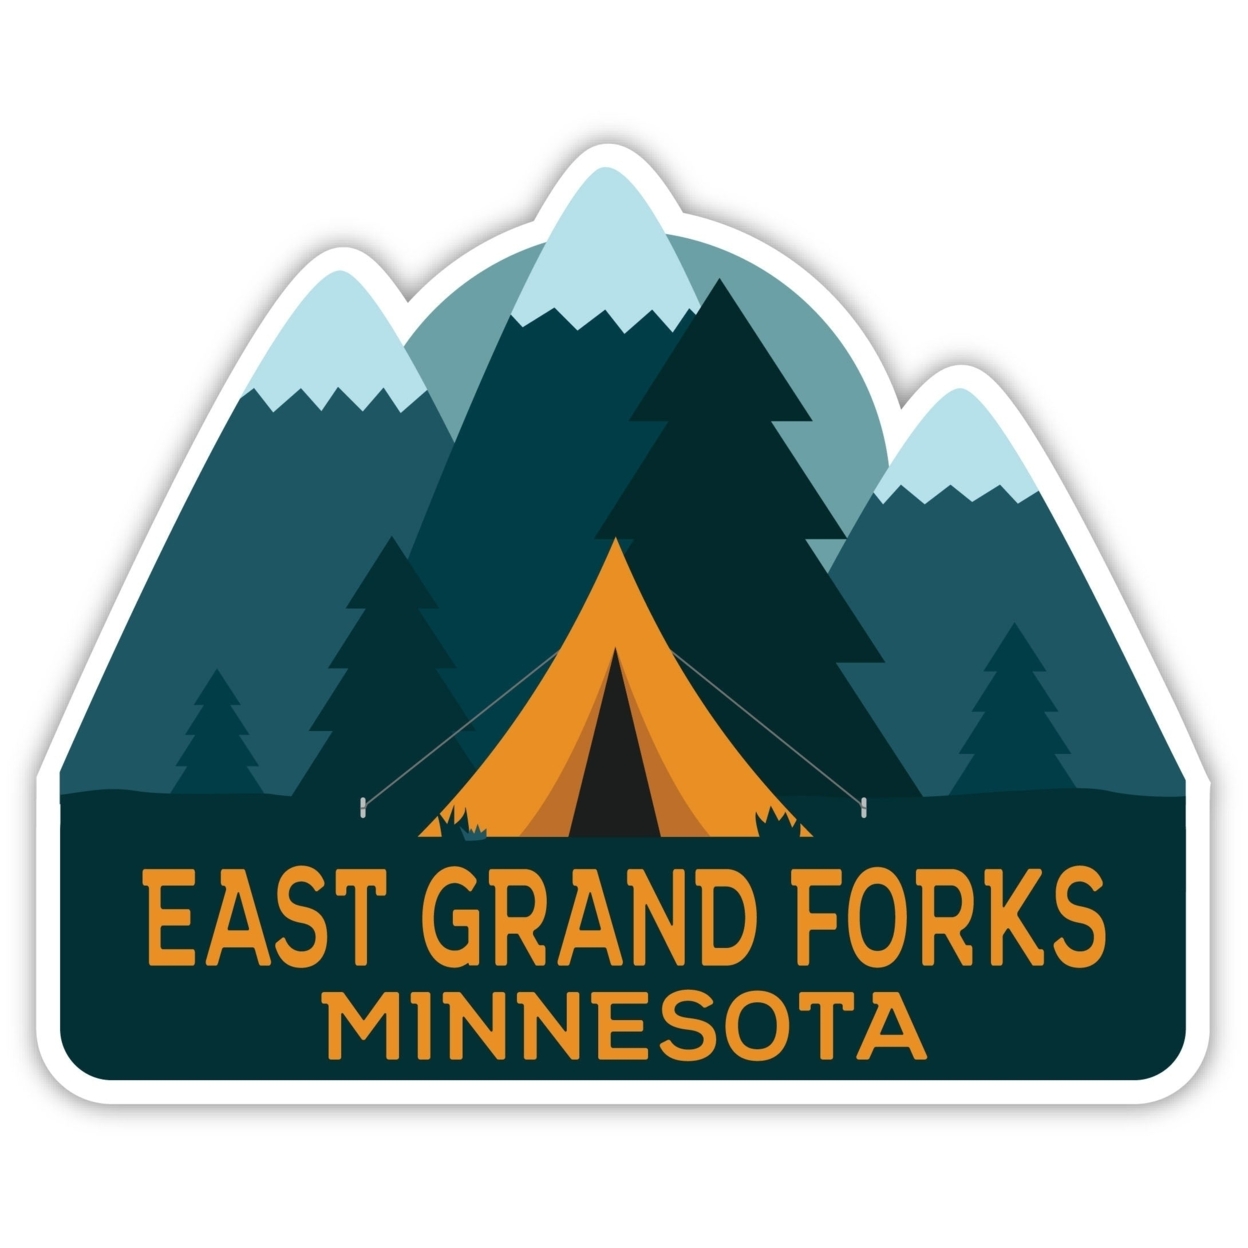 East Grand Forks Minnesota Souvenir Decorative Stickers (Choose Theme And Size) - 4-Pack, 4-Inch, Tent